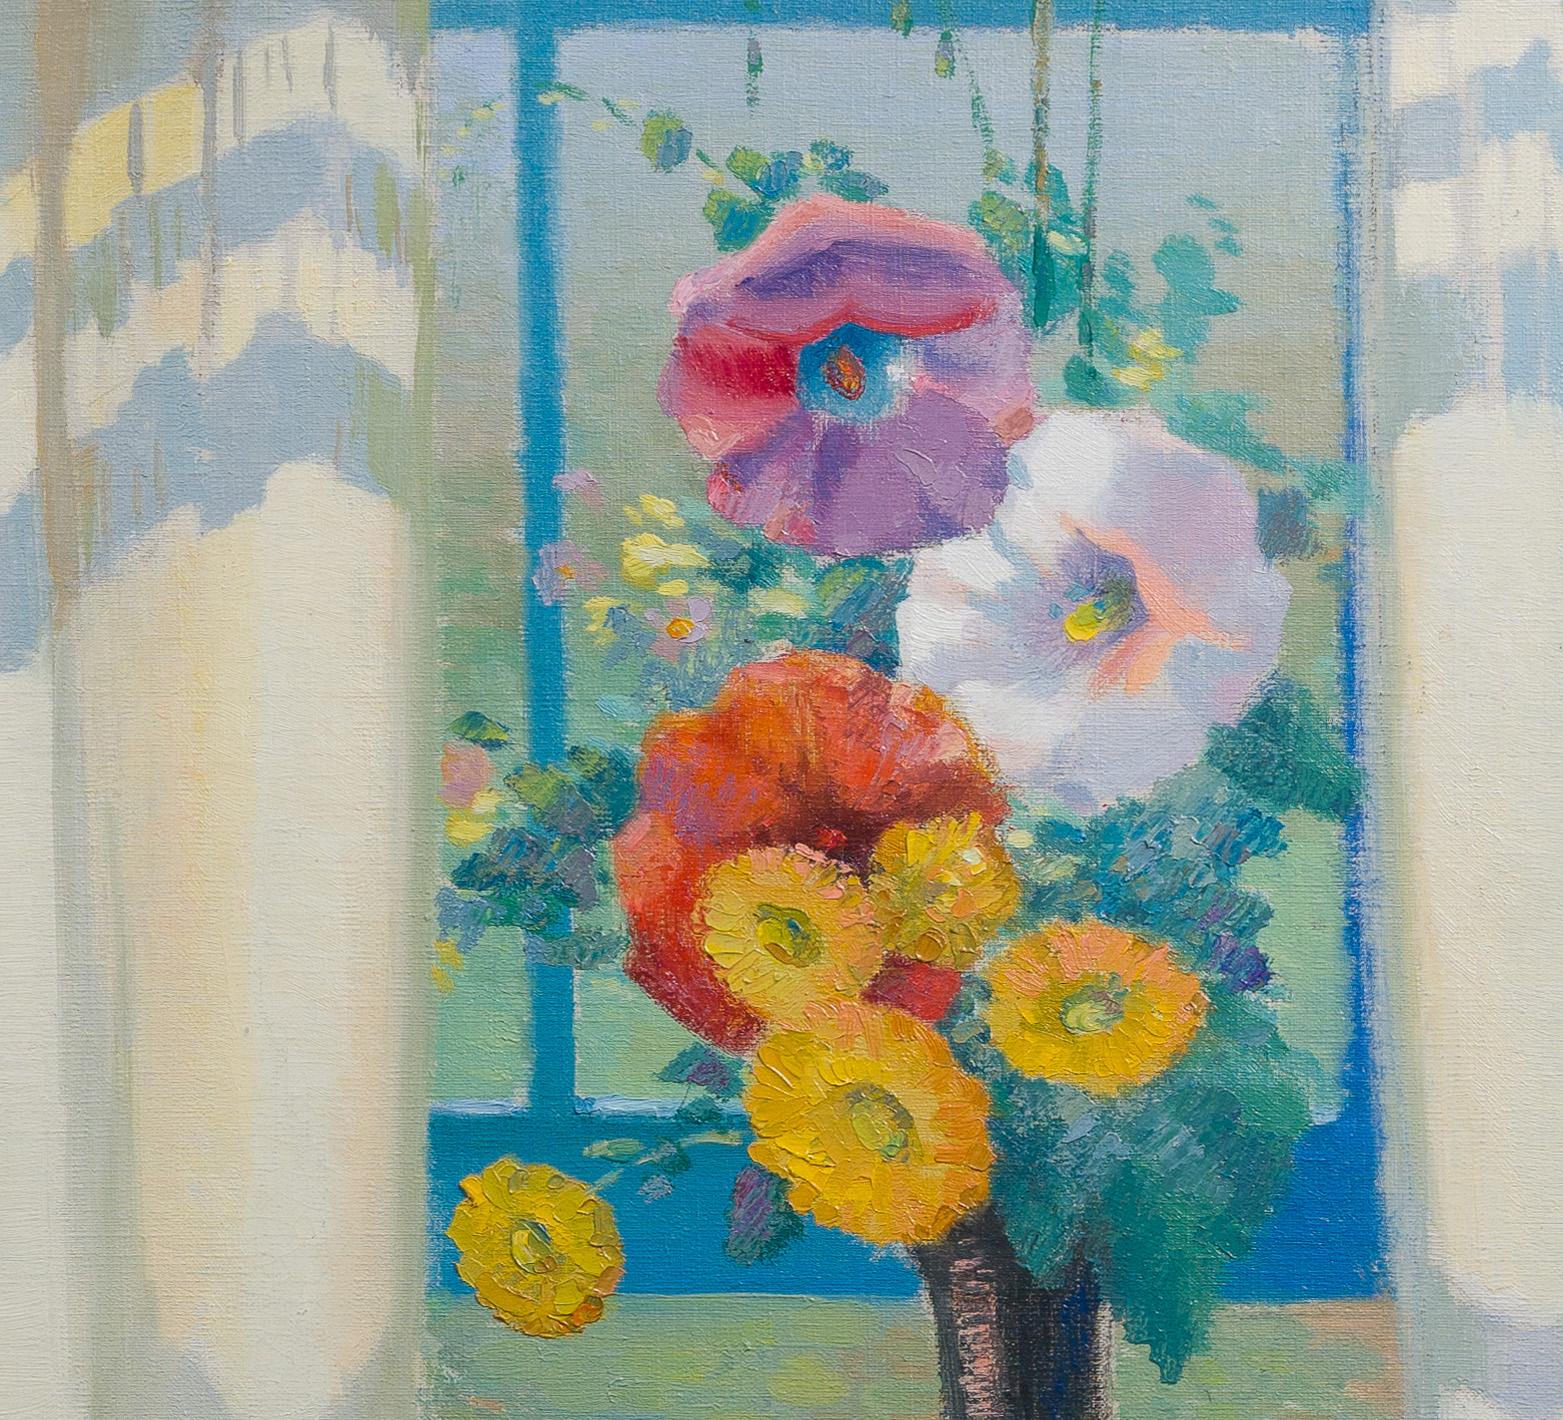 Antique American impressionist still life oil painting by Elizabeth L. Rothwell (c.1877 - 1946).  Oil on canvas.  Framed.  Signed.  Circa 1924.